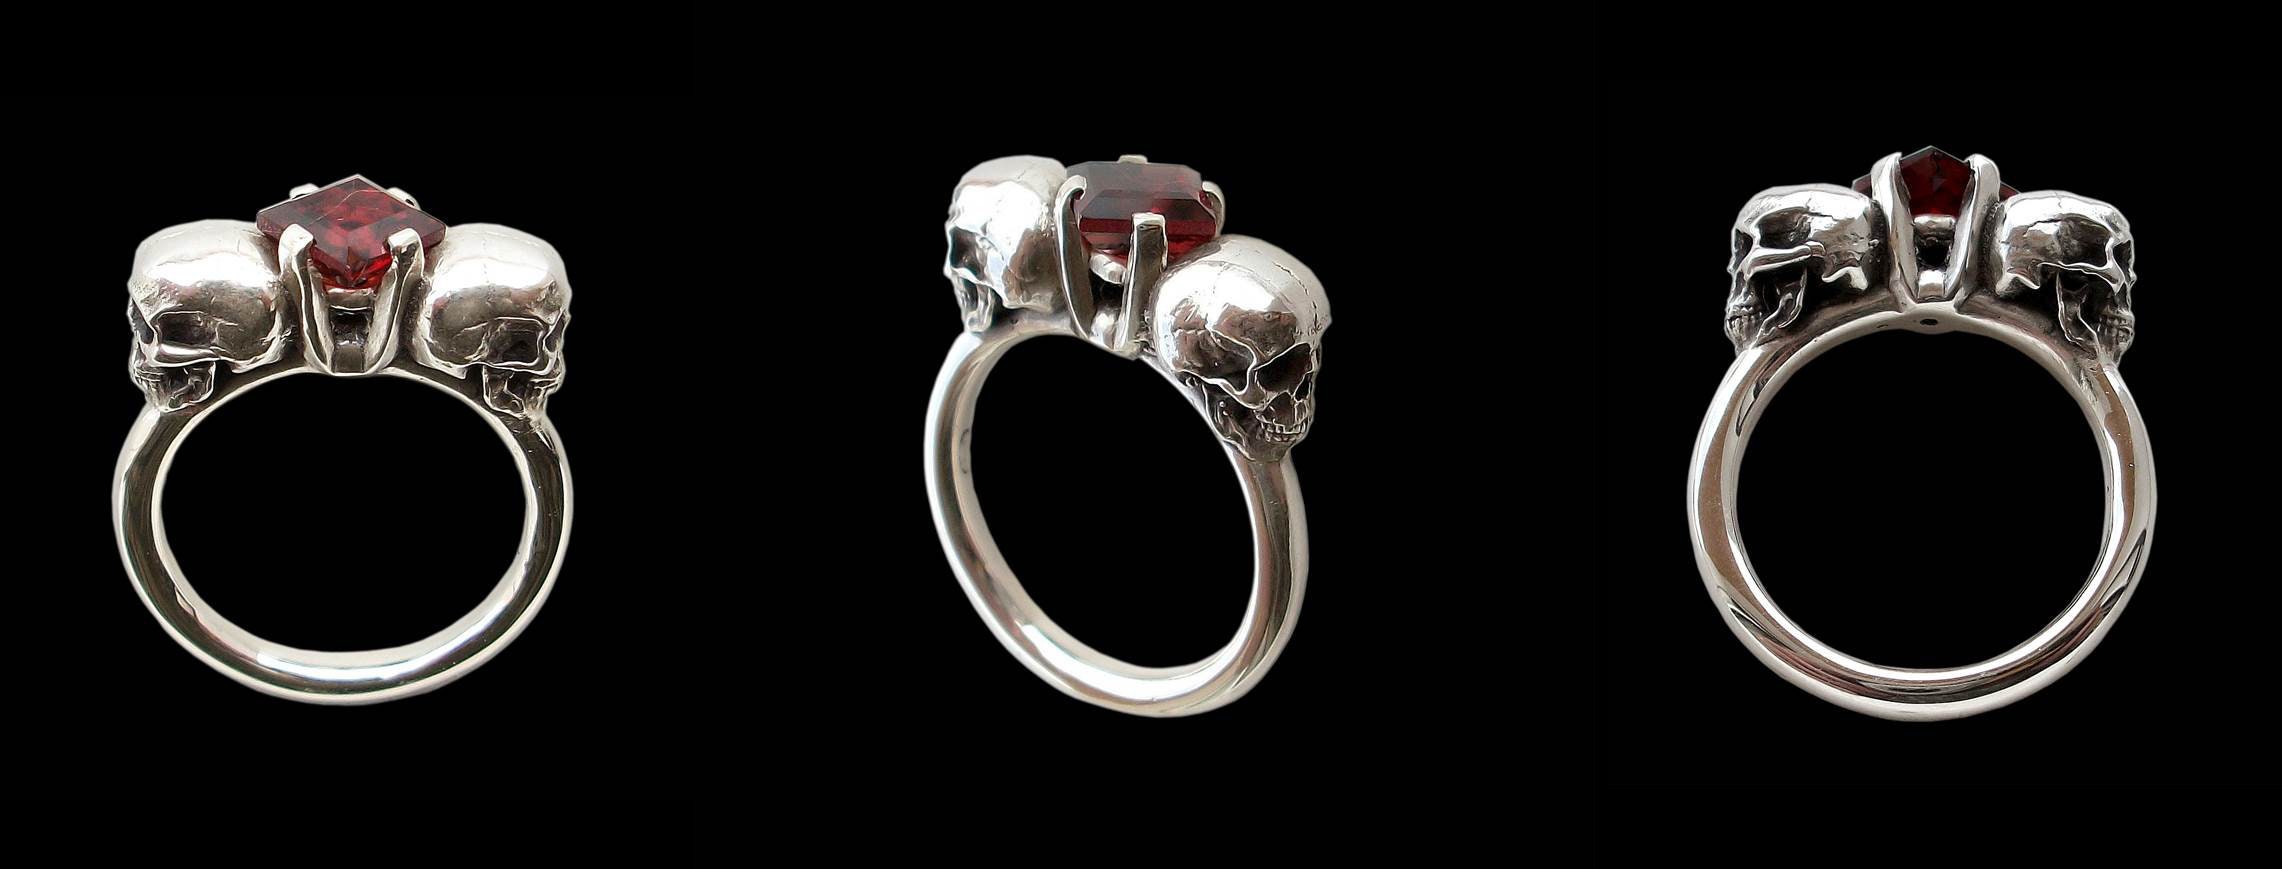 Skull engagement ring - Sterling Silver Ring with Princess Cut Red Garnet - Inspired by Lovers Of Valdaro